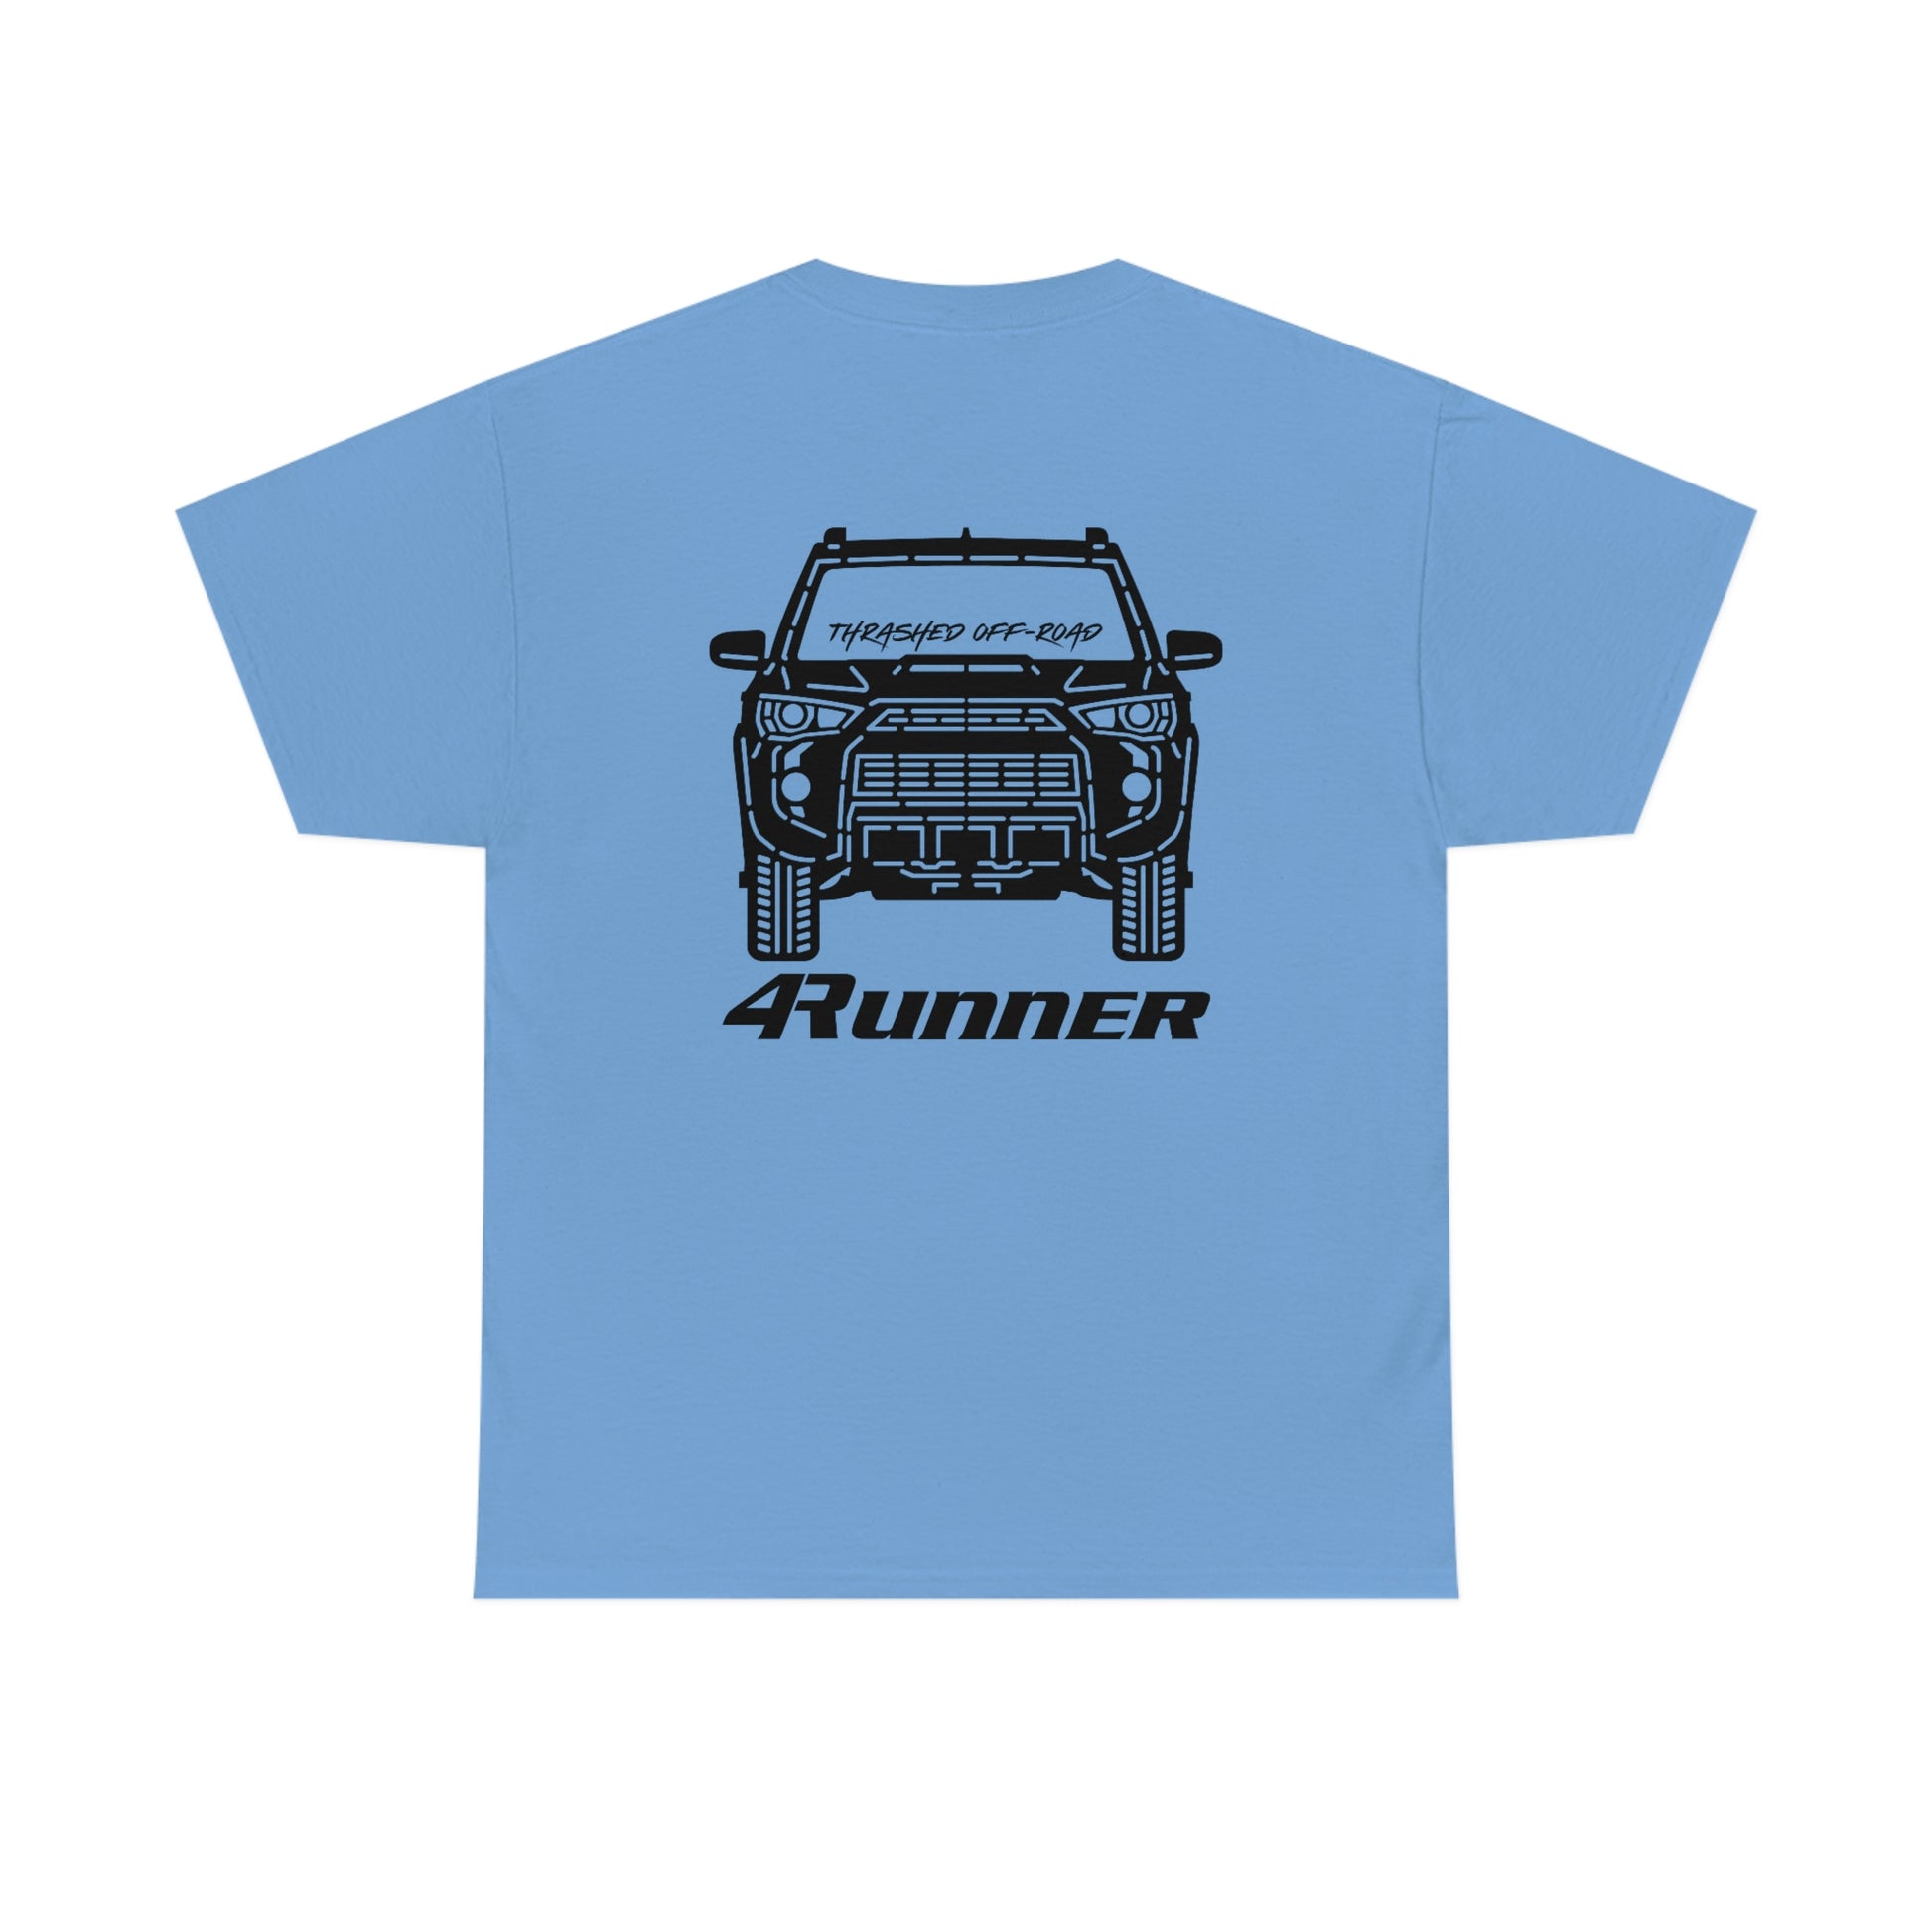 Thrashed Off-Road Abstract 4Runner Shirt - Mid-Atlantic Off-Roading